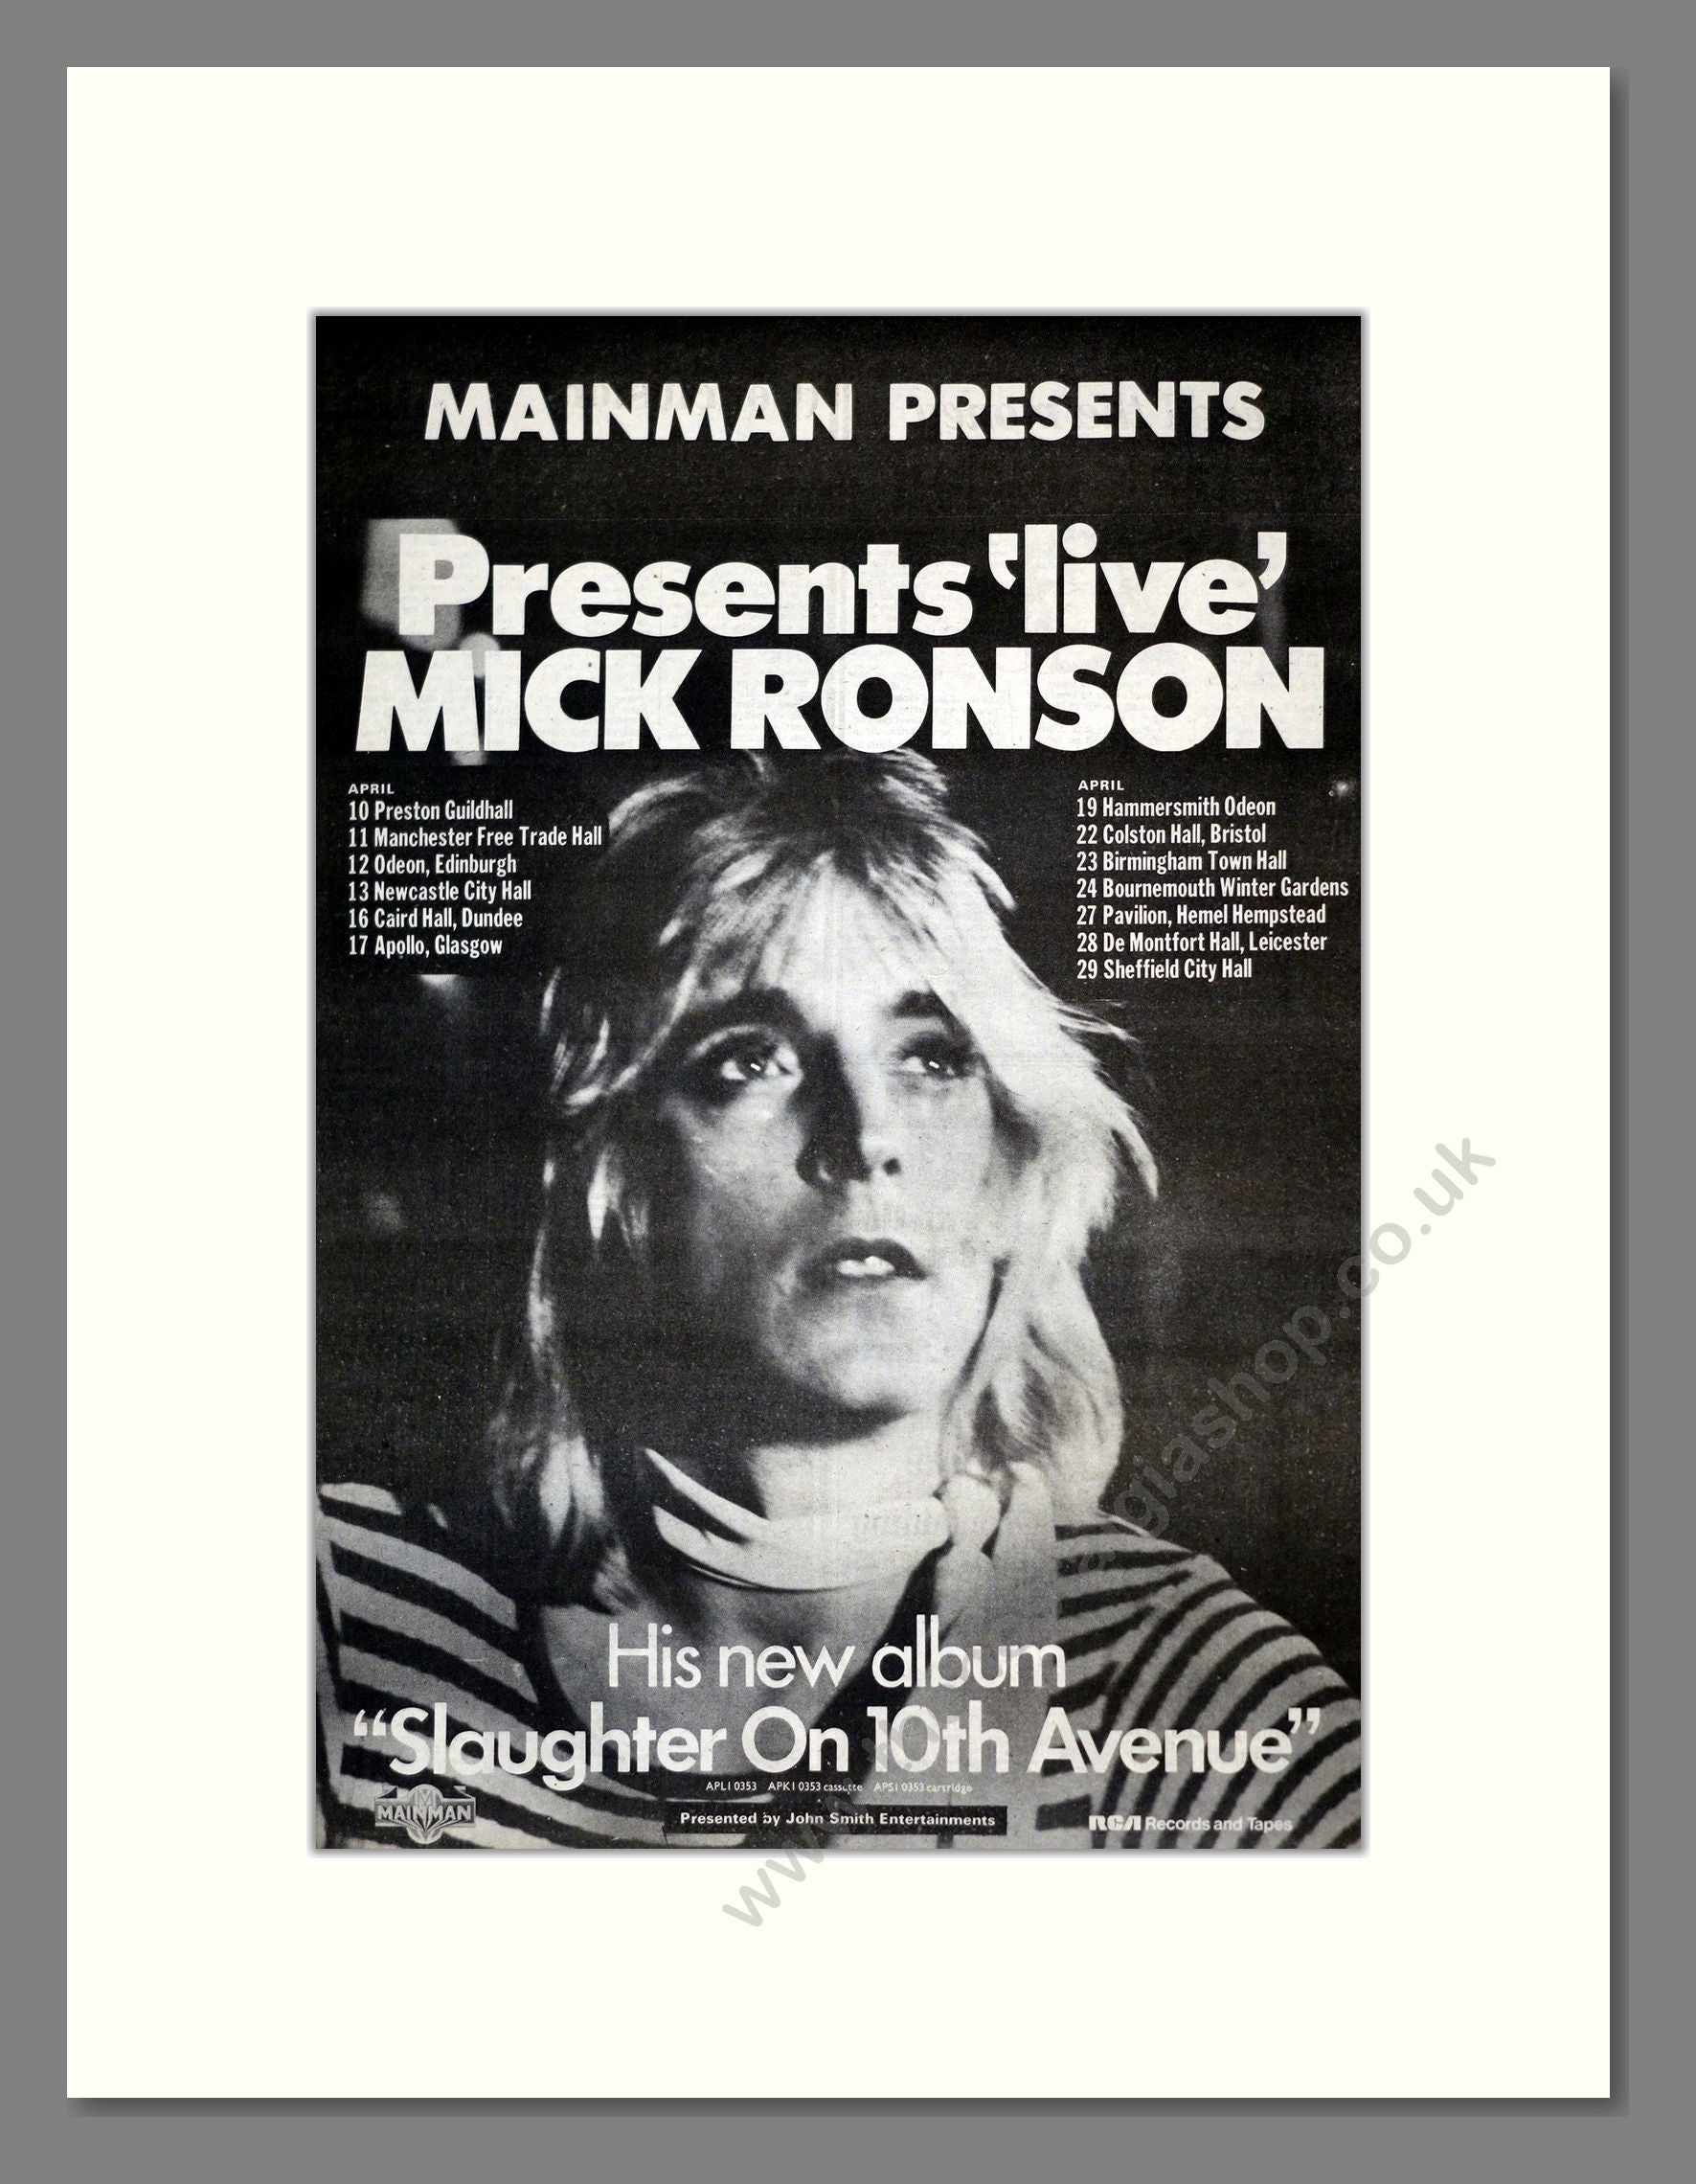 Mick Ronson - Slaughter On 10th Avenue (UK Tour). Vintage Advert 1974 (ref AD17790)